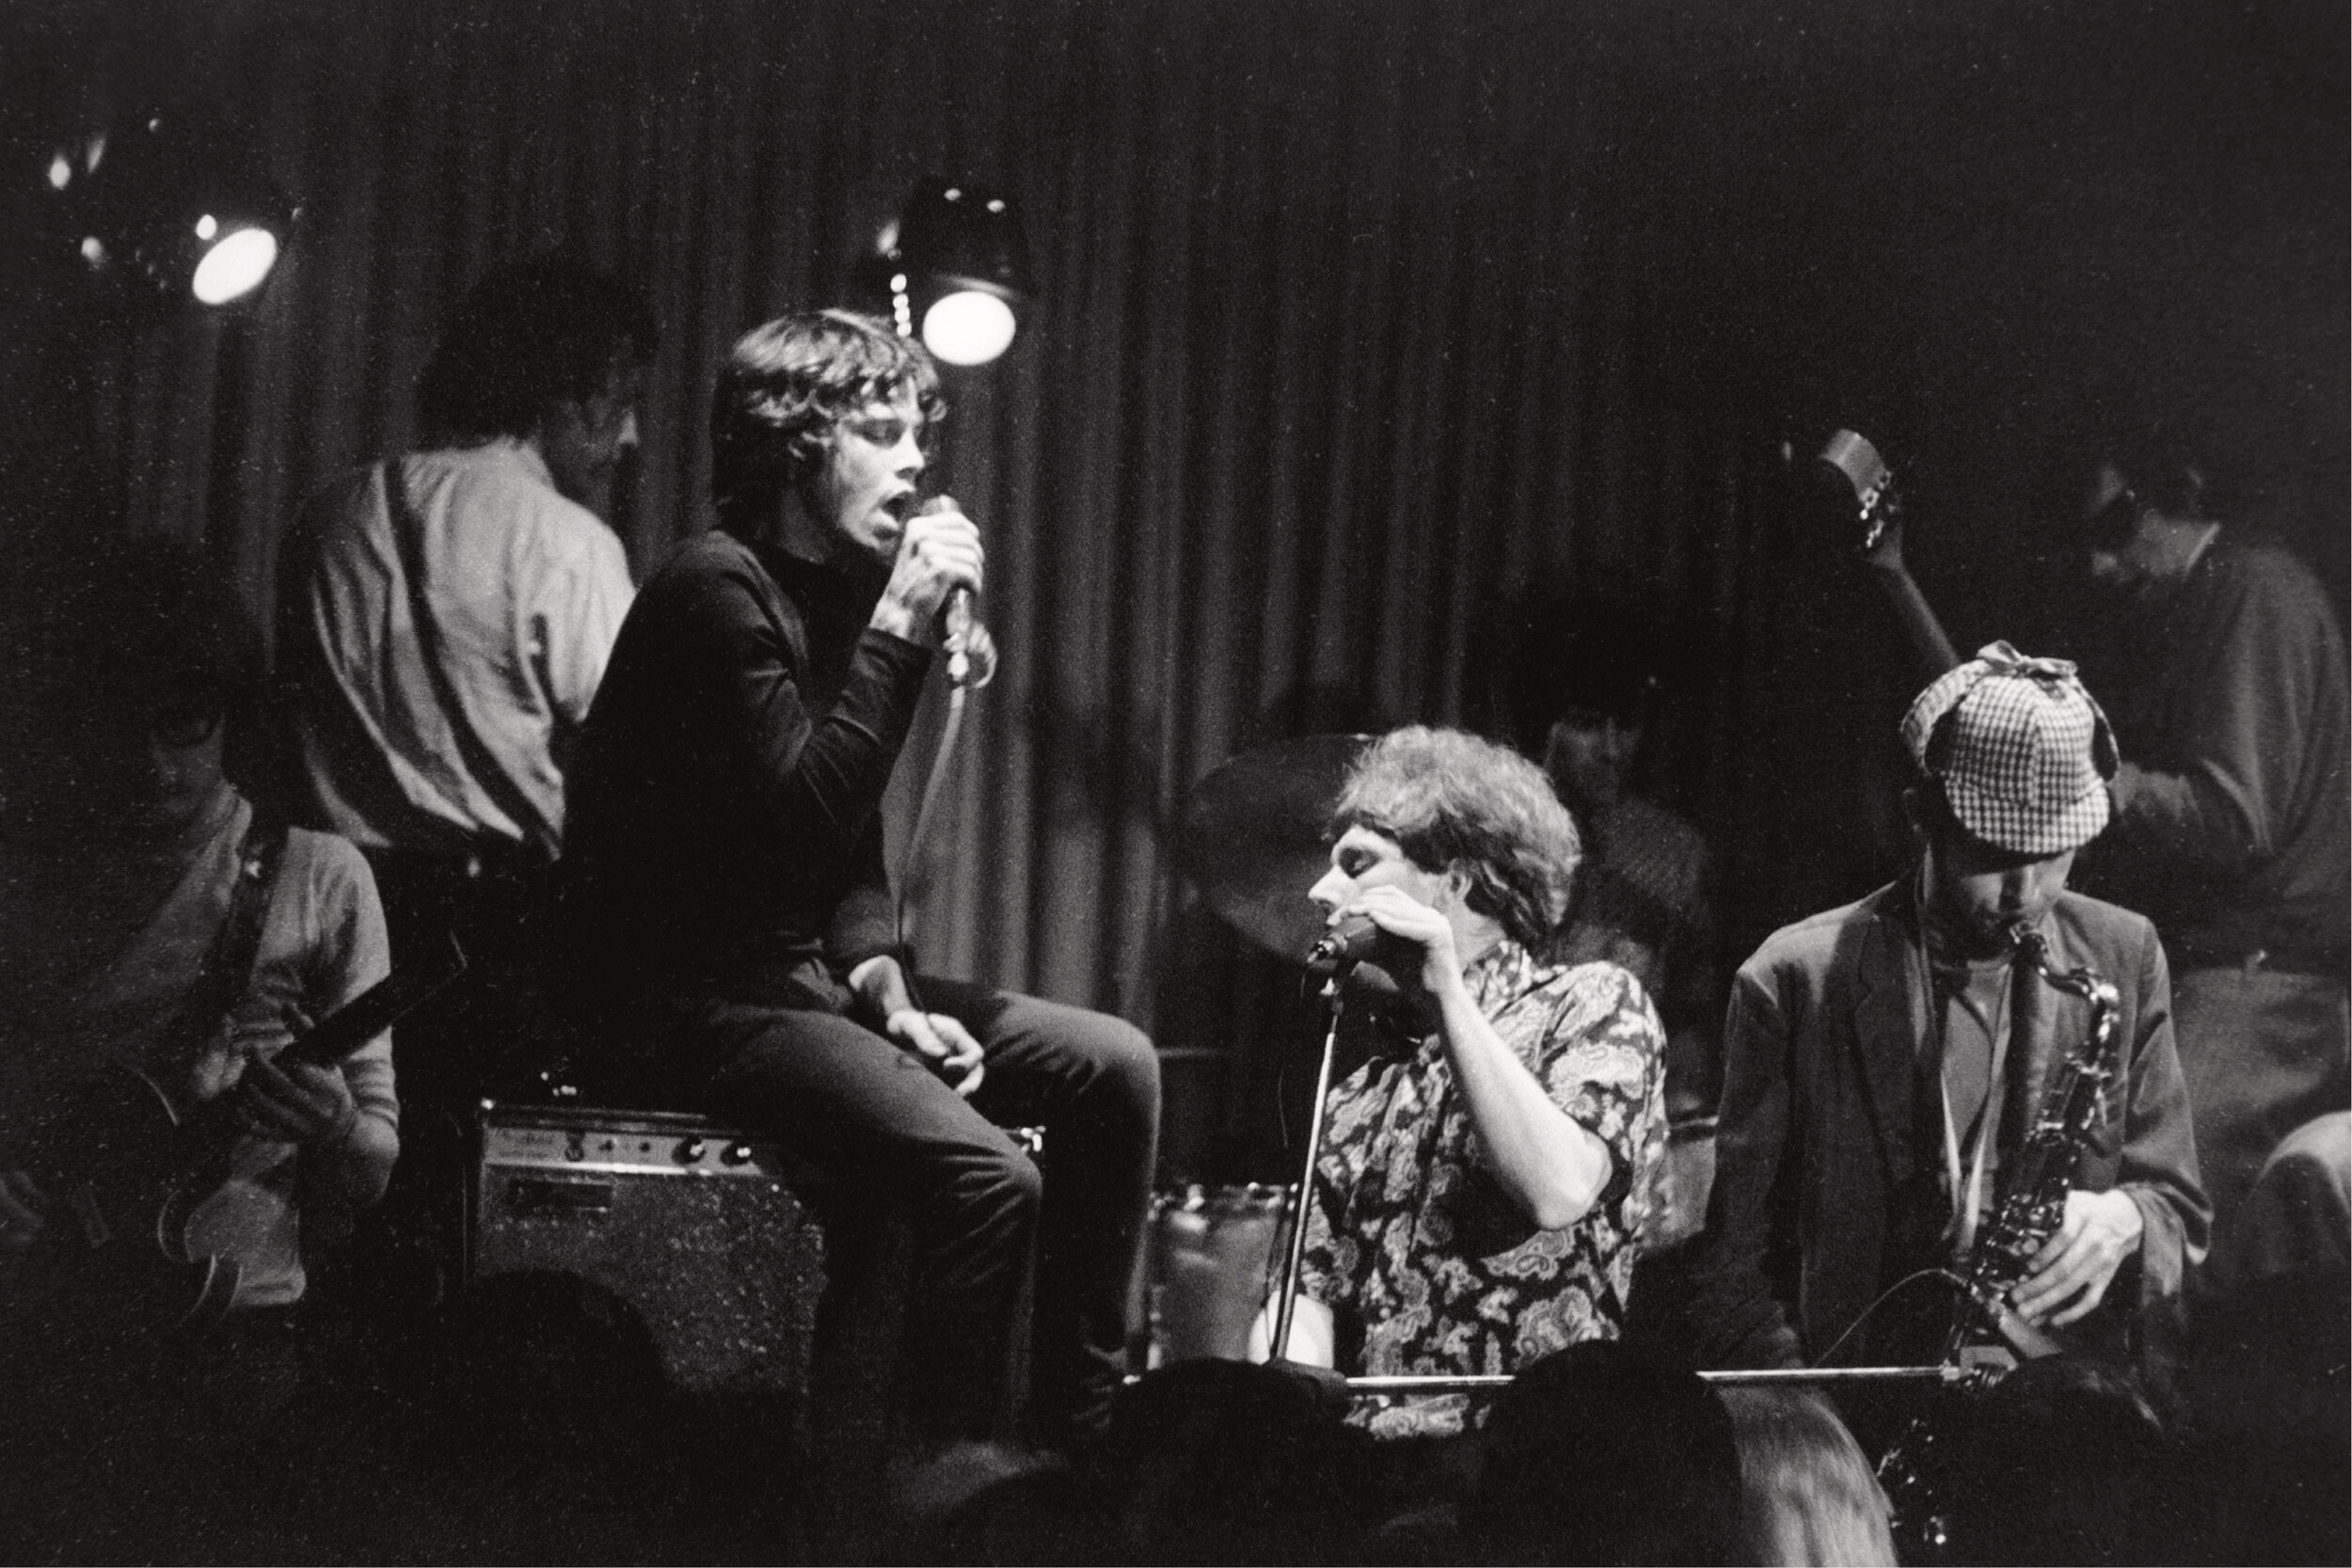 Jim Morrison and Van Morrison at the Whisky a Go Go, 1966